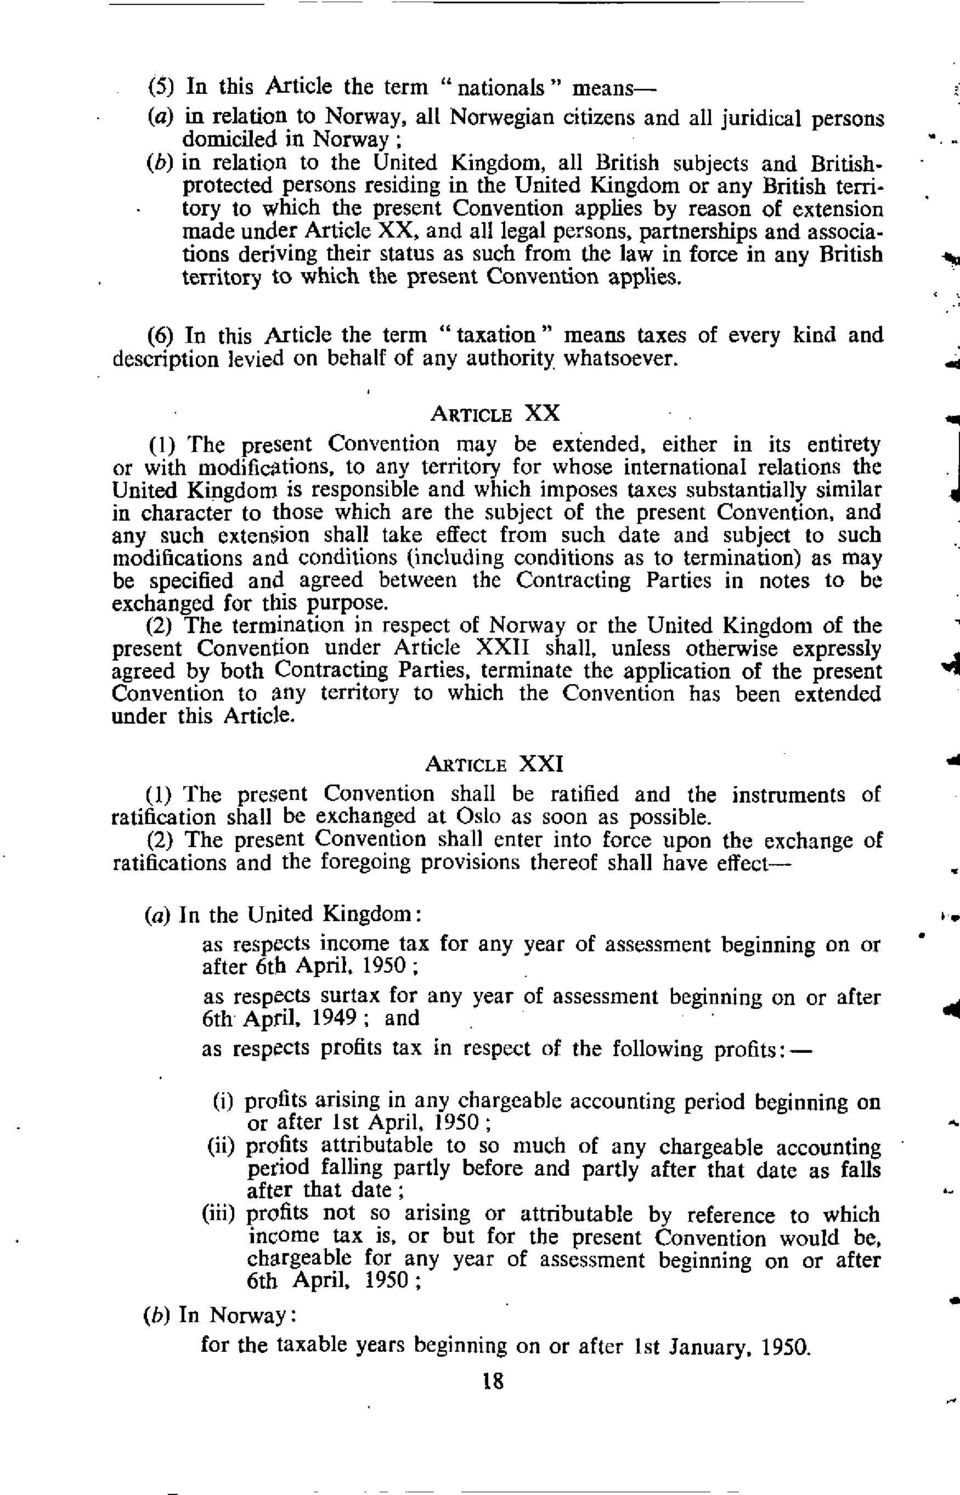 persons, partnerships and associations deriving their status as such from the law in force in any British territory to which the present Convention applies.